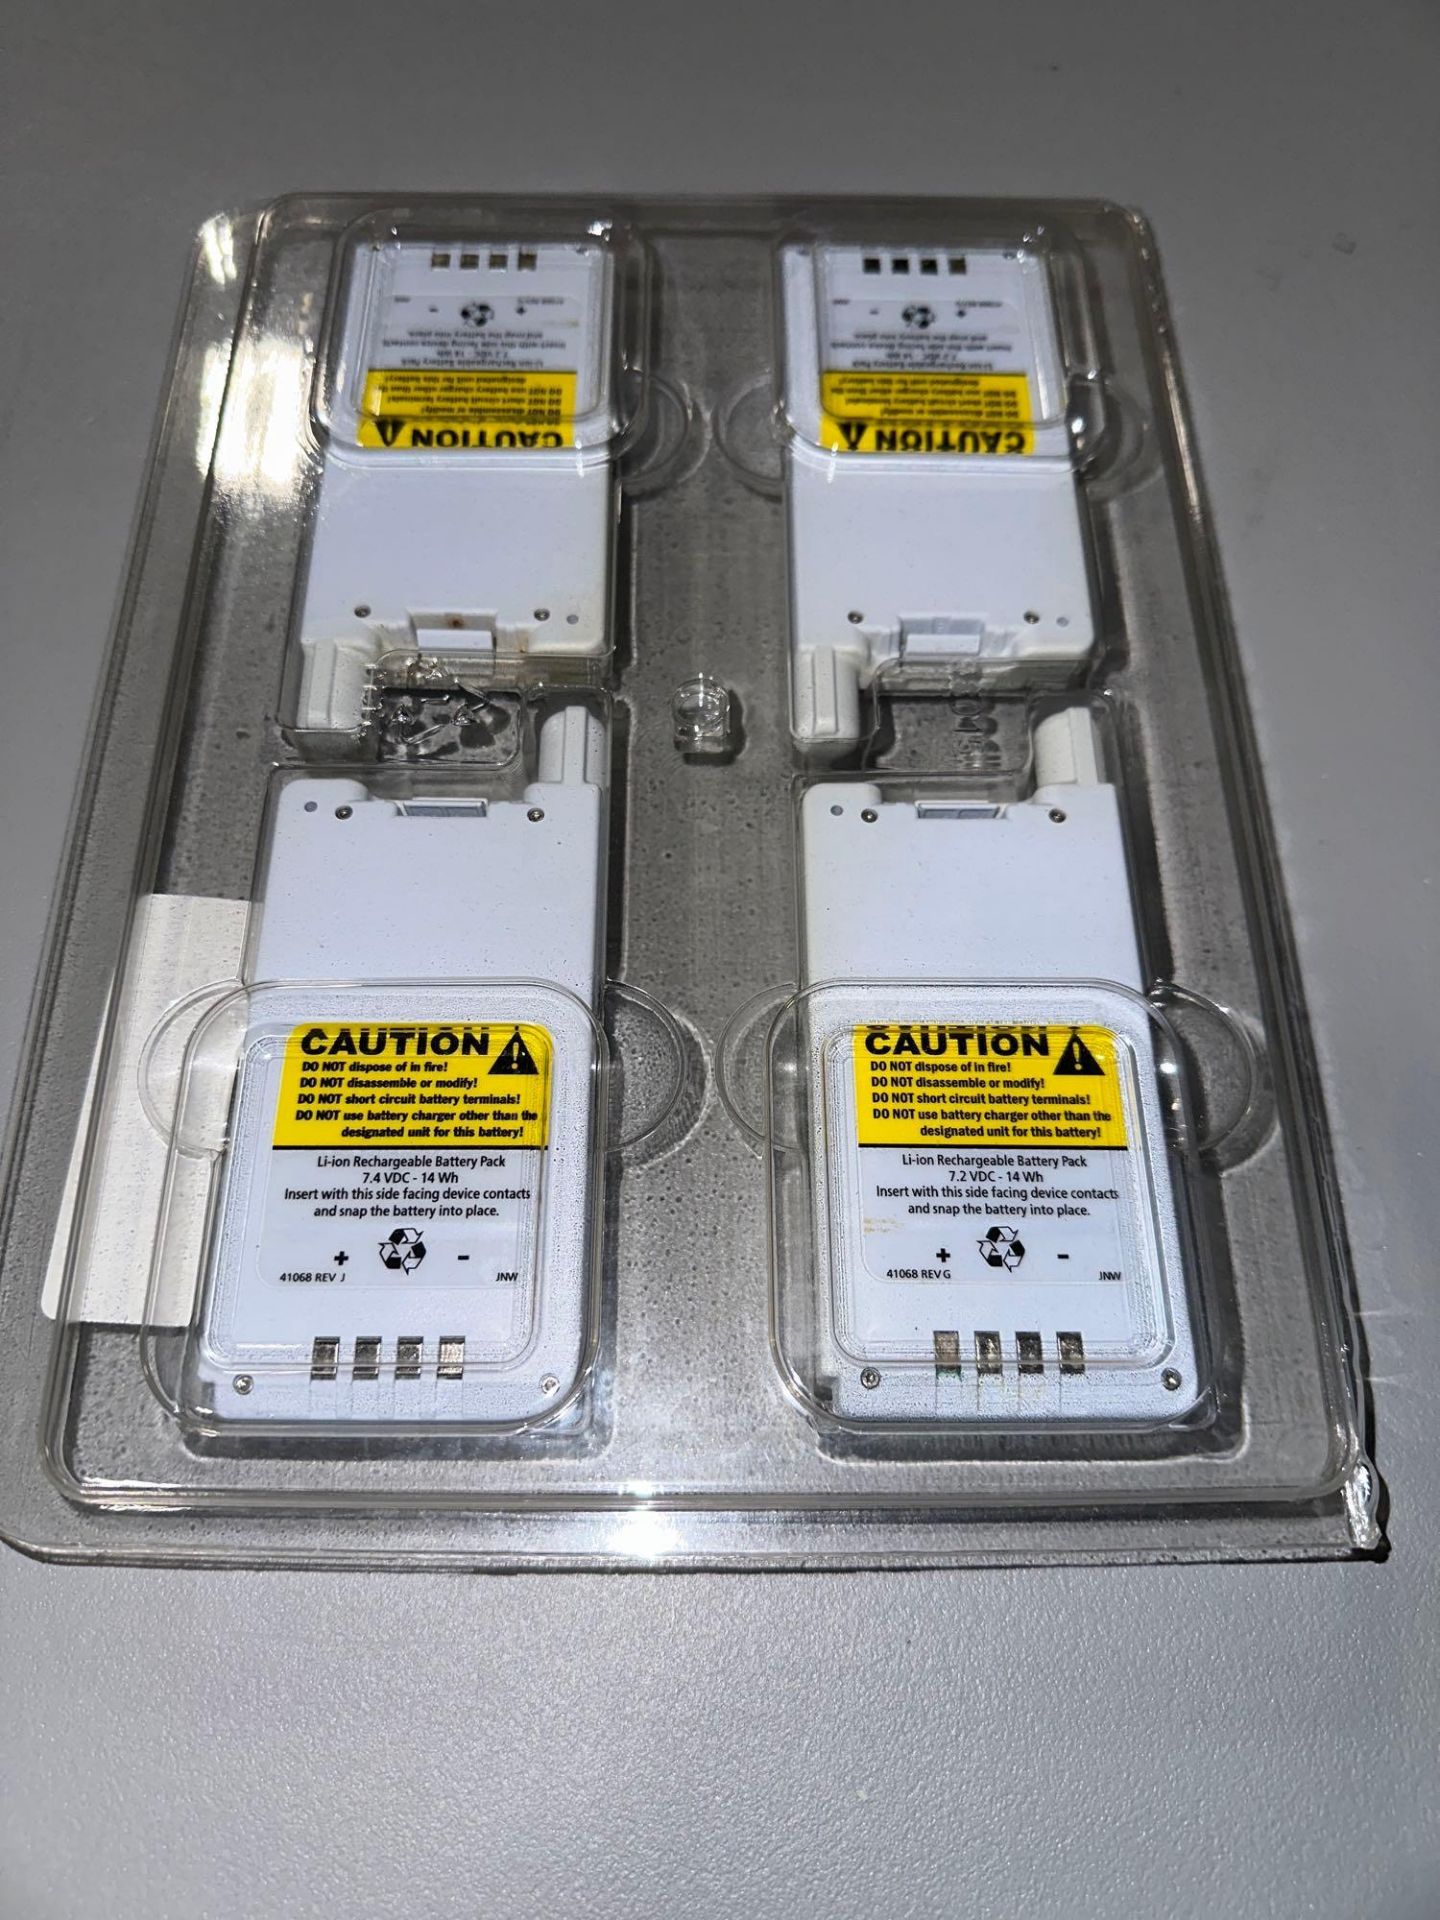 LOT OF BAXTER SIGMA SPECTRUM INFUSION PUMP BATTERIES - Image 2 of 2